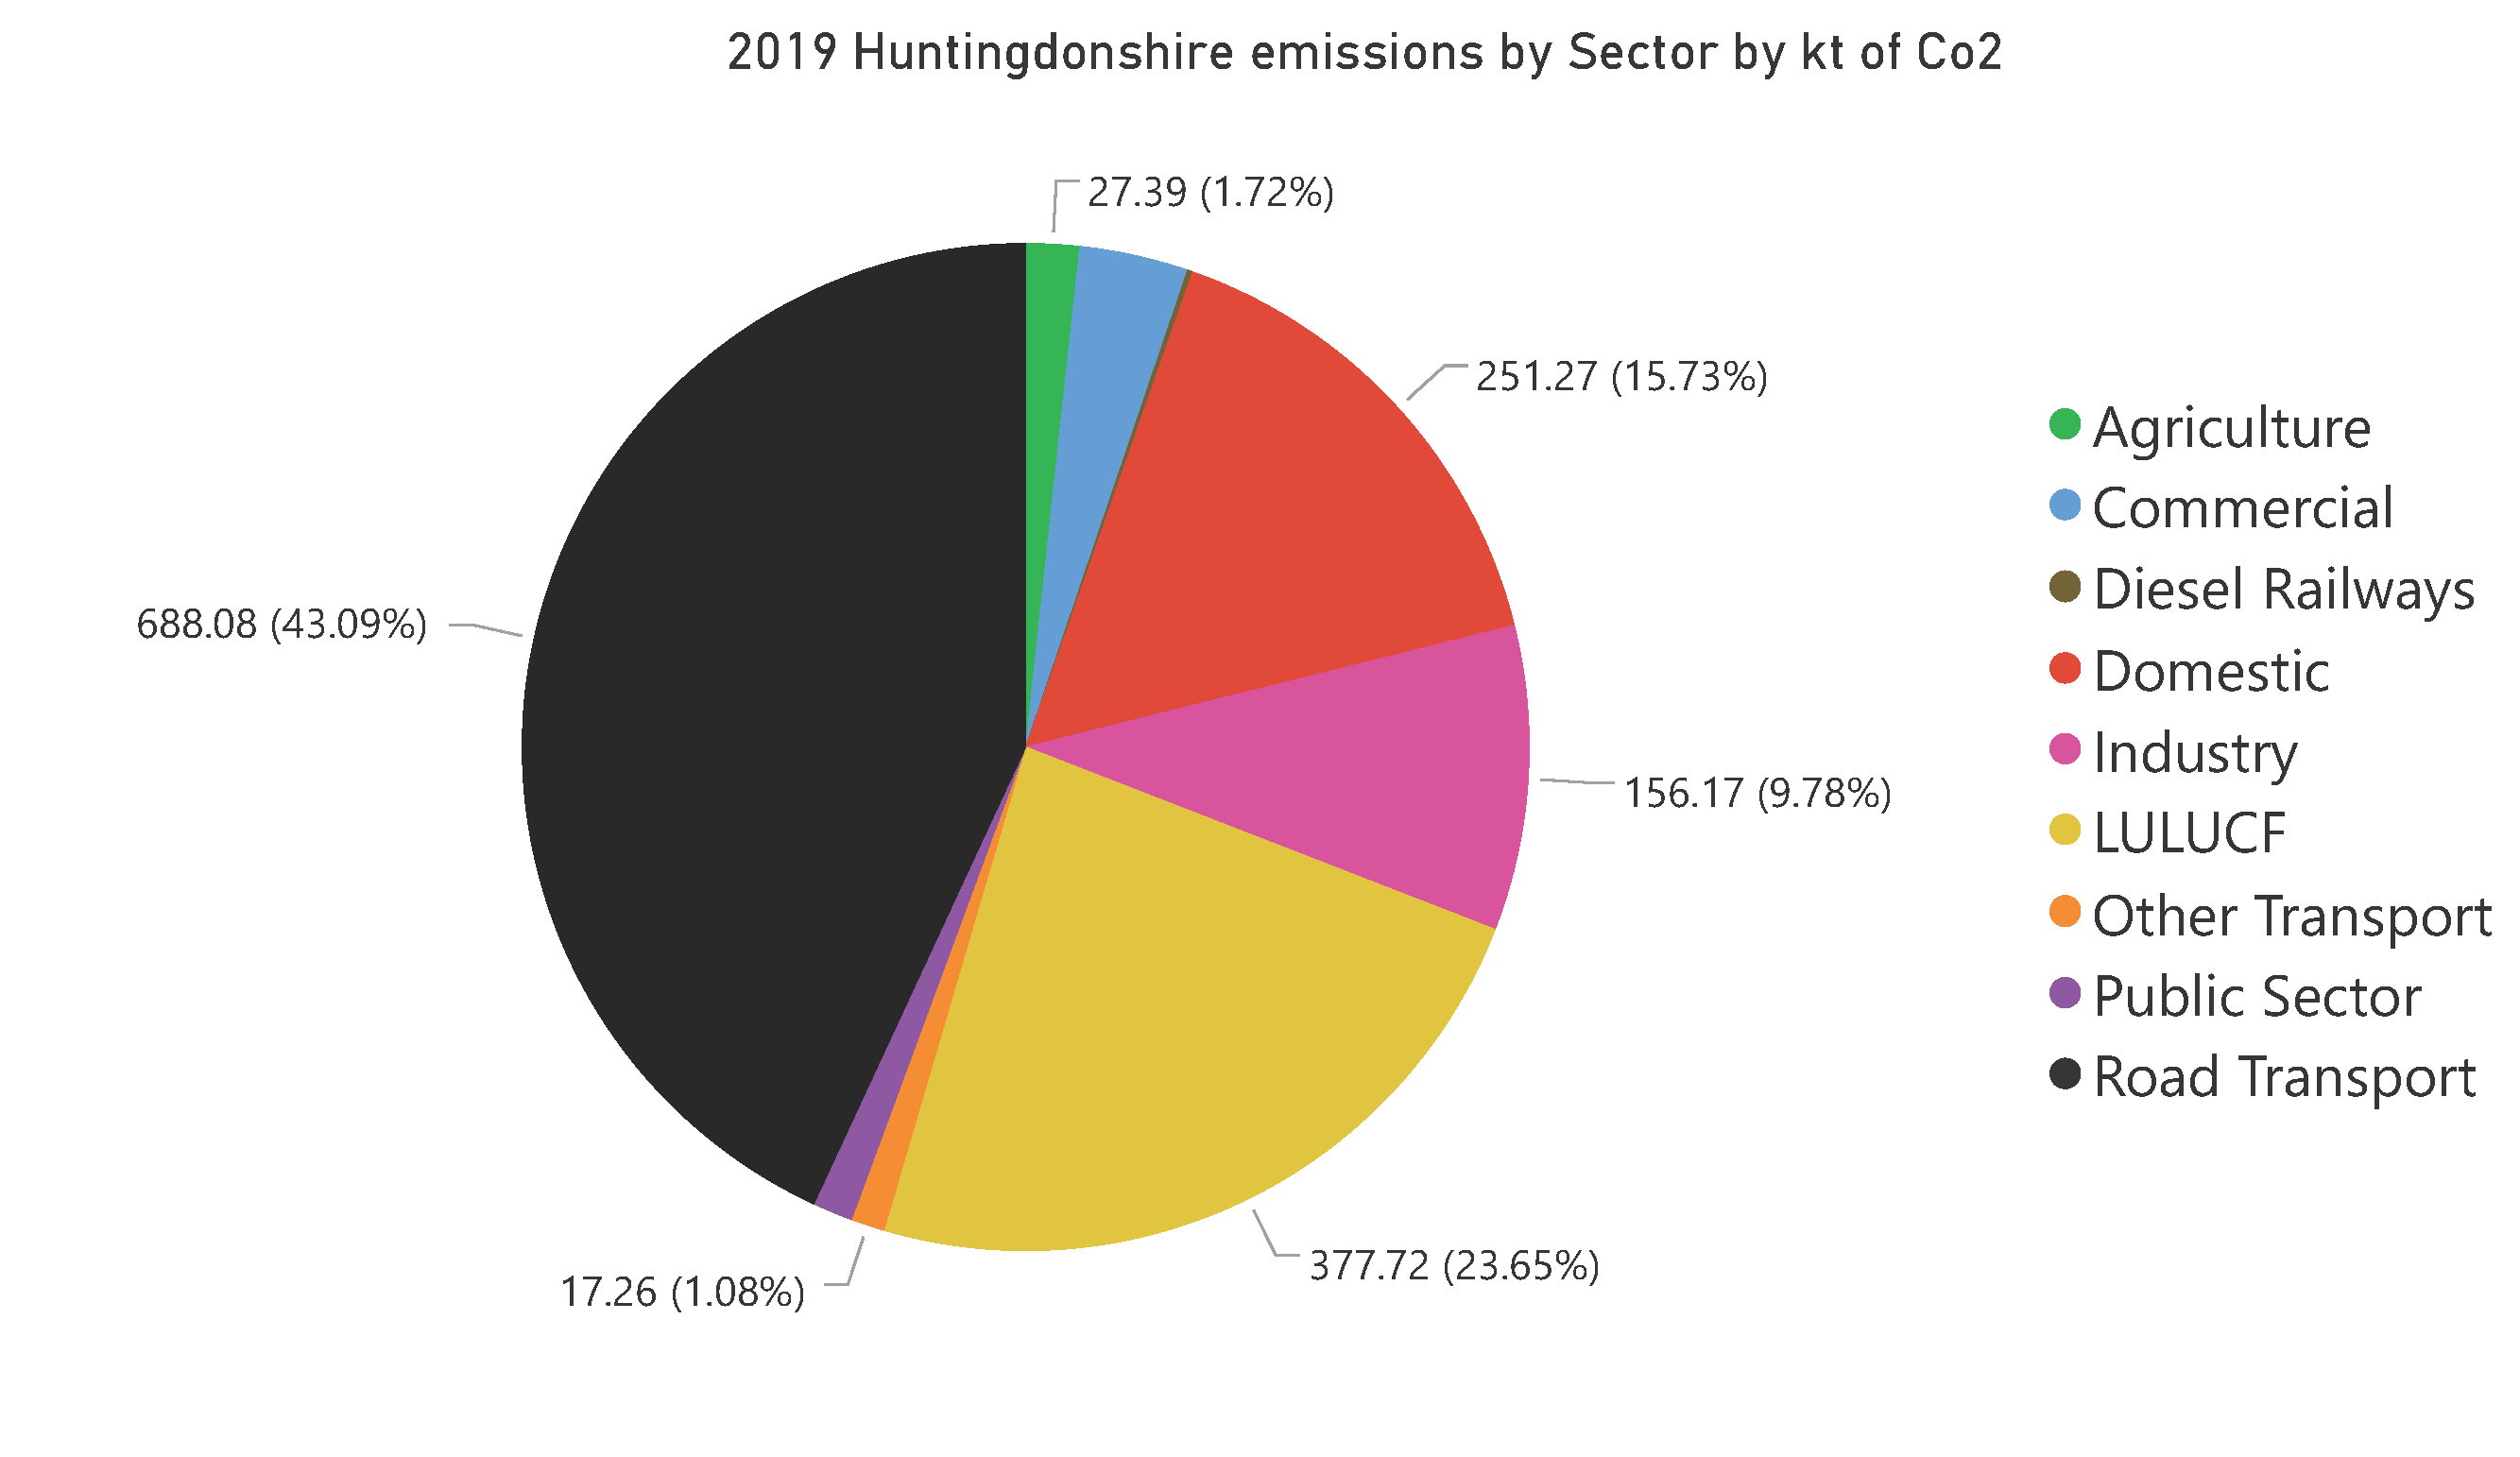 Pie Chart showing 2019 Huntingdonshire emissions by sector by kilotons of co2.  Agriculture 27.39 kilotons 1.72% Commercial 55.86 kilotons 3.5% Diesel Railways 2.7 kilotons 0.17% Domestic 251.27 kilotons 15.73% Industry 156.17 kilotons 9.78% LULUCF 377.72 kilotons 23.65% Other Transport 17.26 kilotons 1.08% Public Sector 20.54 kilotons 1.29% Road Transport 688.08 kilotons 43.09%